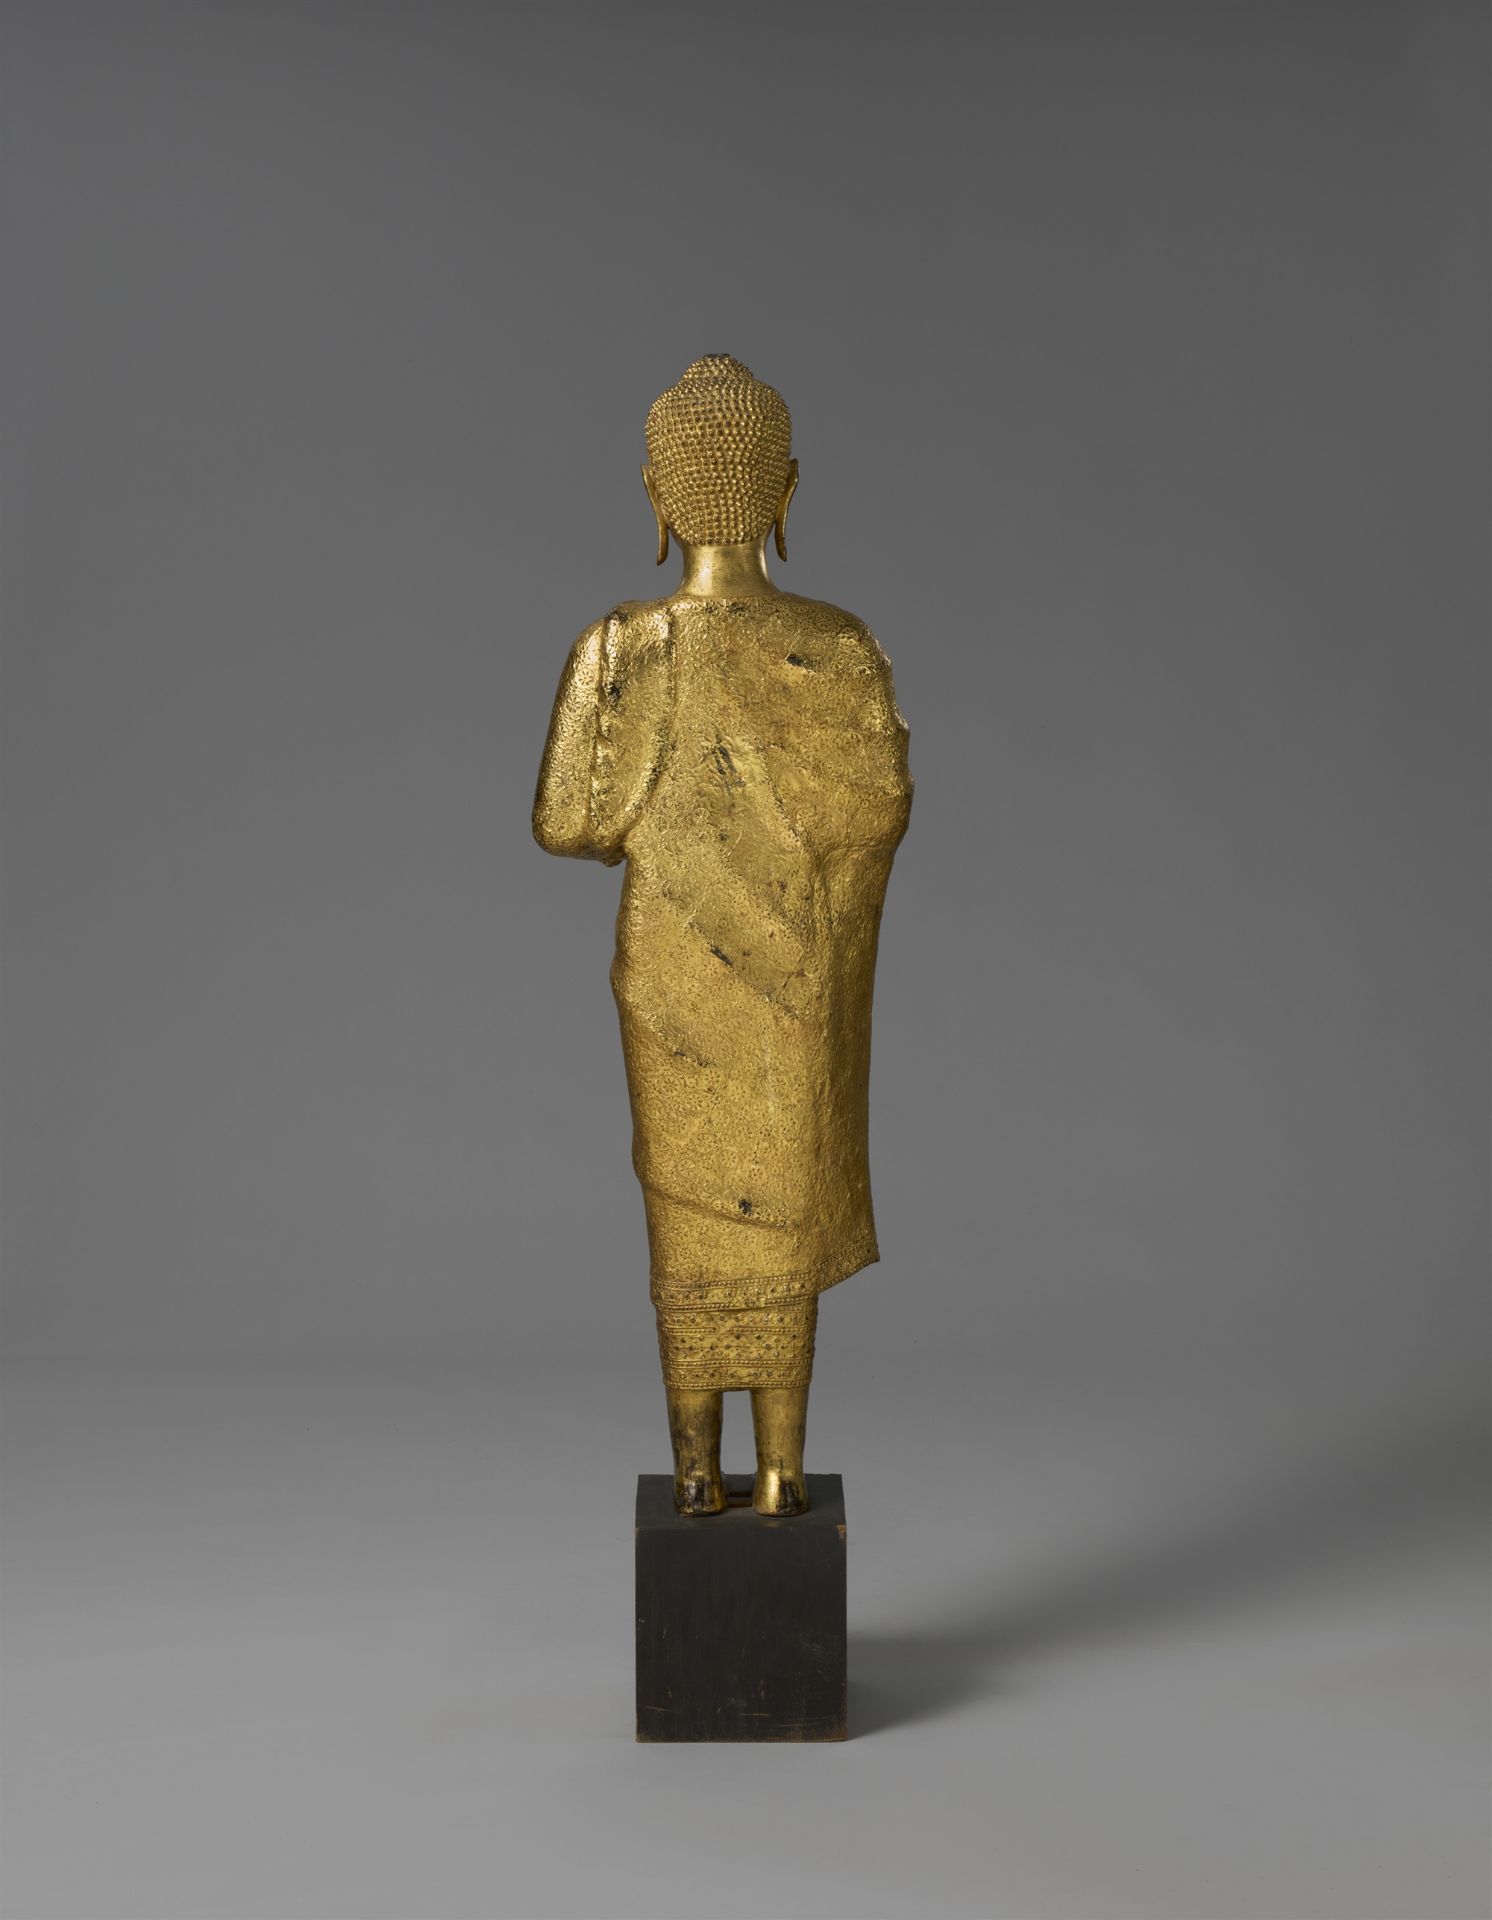 A Ratanakosin gilt and lacquered bronze figure of a Buddha. Thailand. 20th century - Image 2 of 2